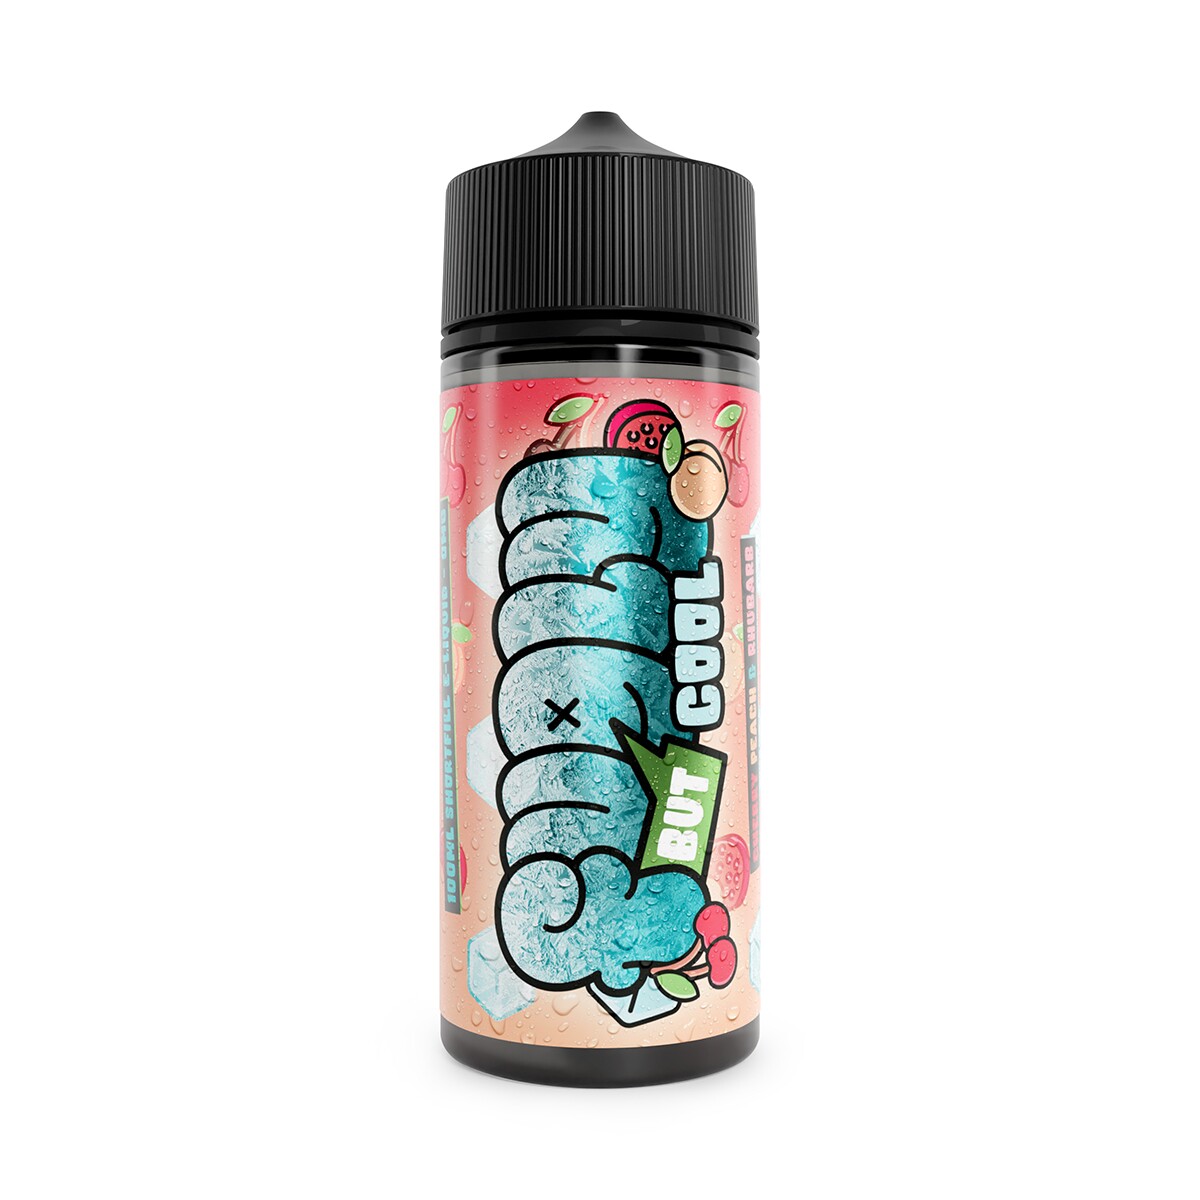 Get Your Fugly But Cool Cherry Peach & Rhubarb, A Marvellous Medley Of Flavours Over At Dispergo Vaping Uk